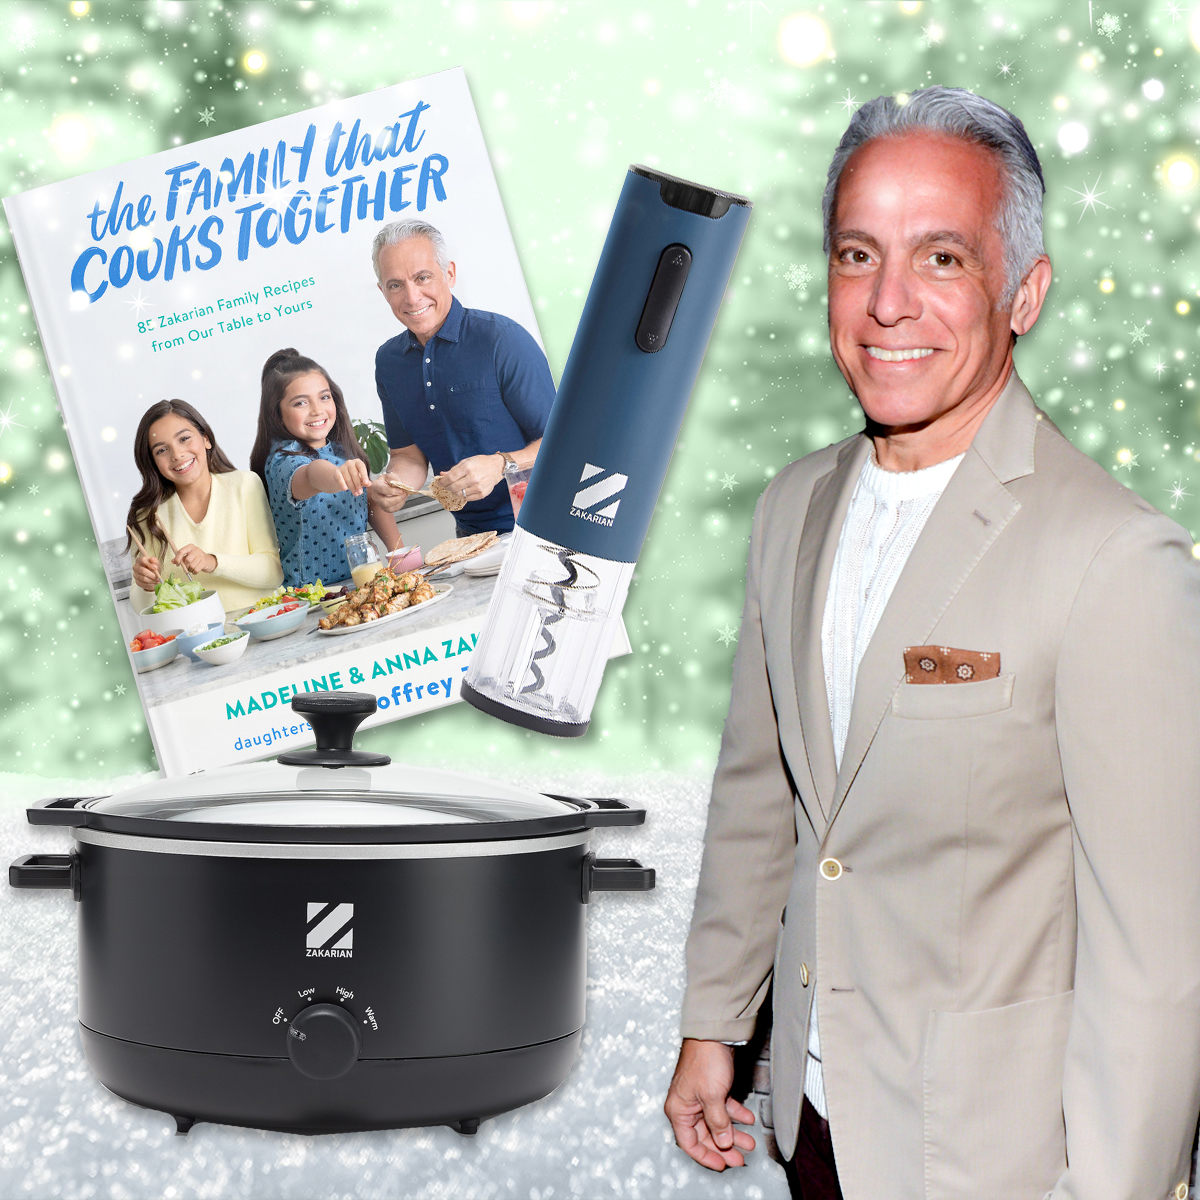 https://akns-images.eonline.com/eol_images/Entire_Site/2020919/rs_1200x1200-201019111035-1200-holiday-gift-guide-Geoffrey-Zakarian.jpg?fit=around%7C1080:1080&output-quality=90&crop=1080:1080;center,top